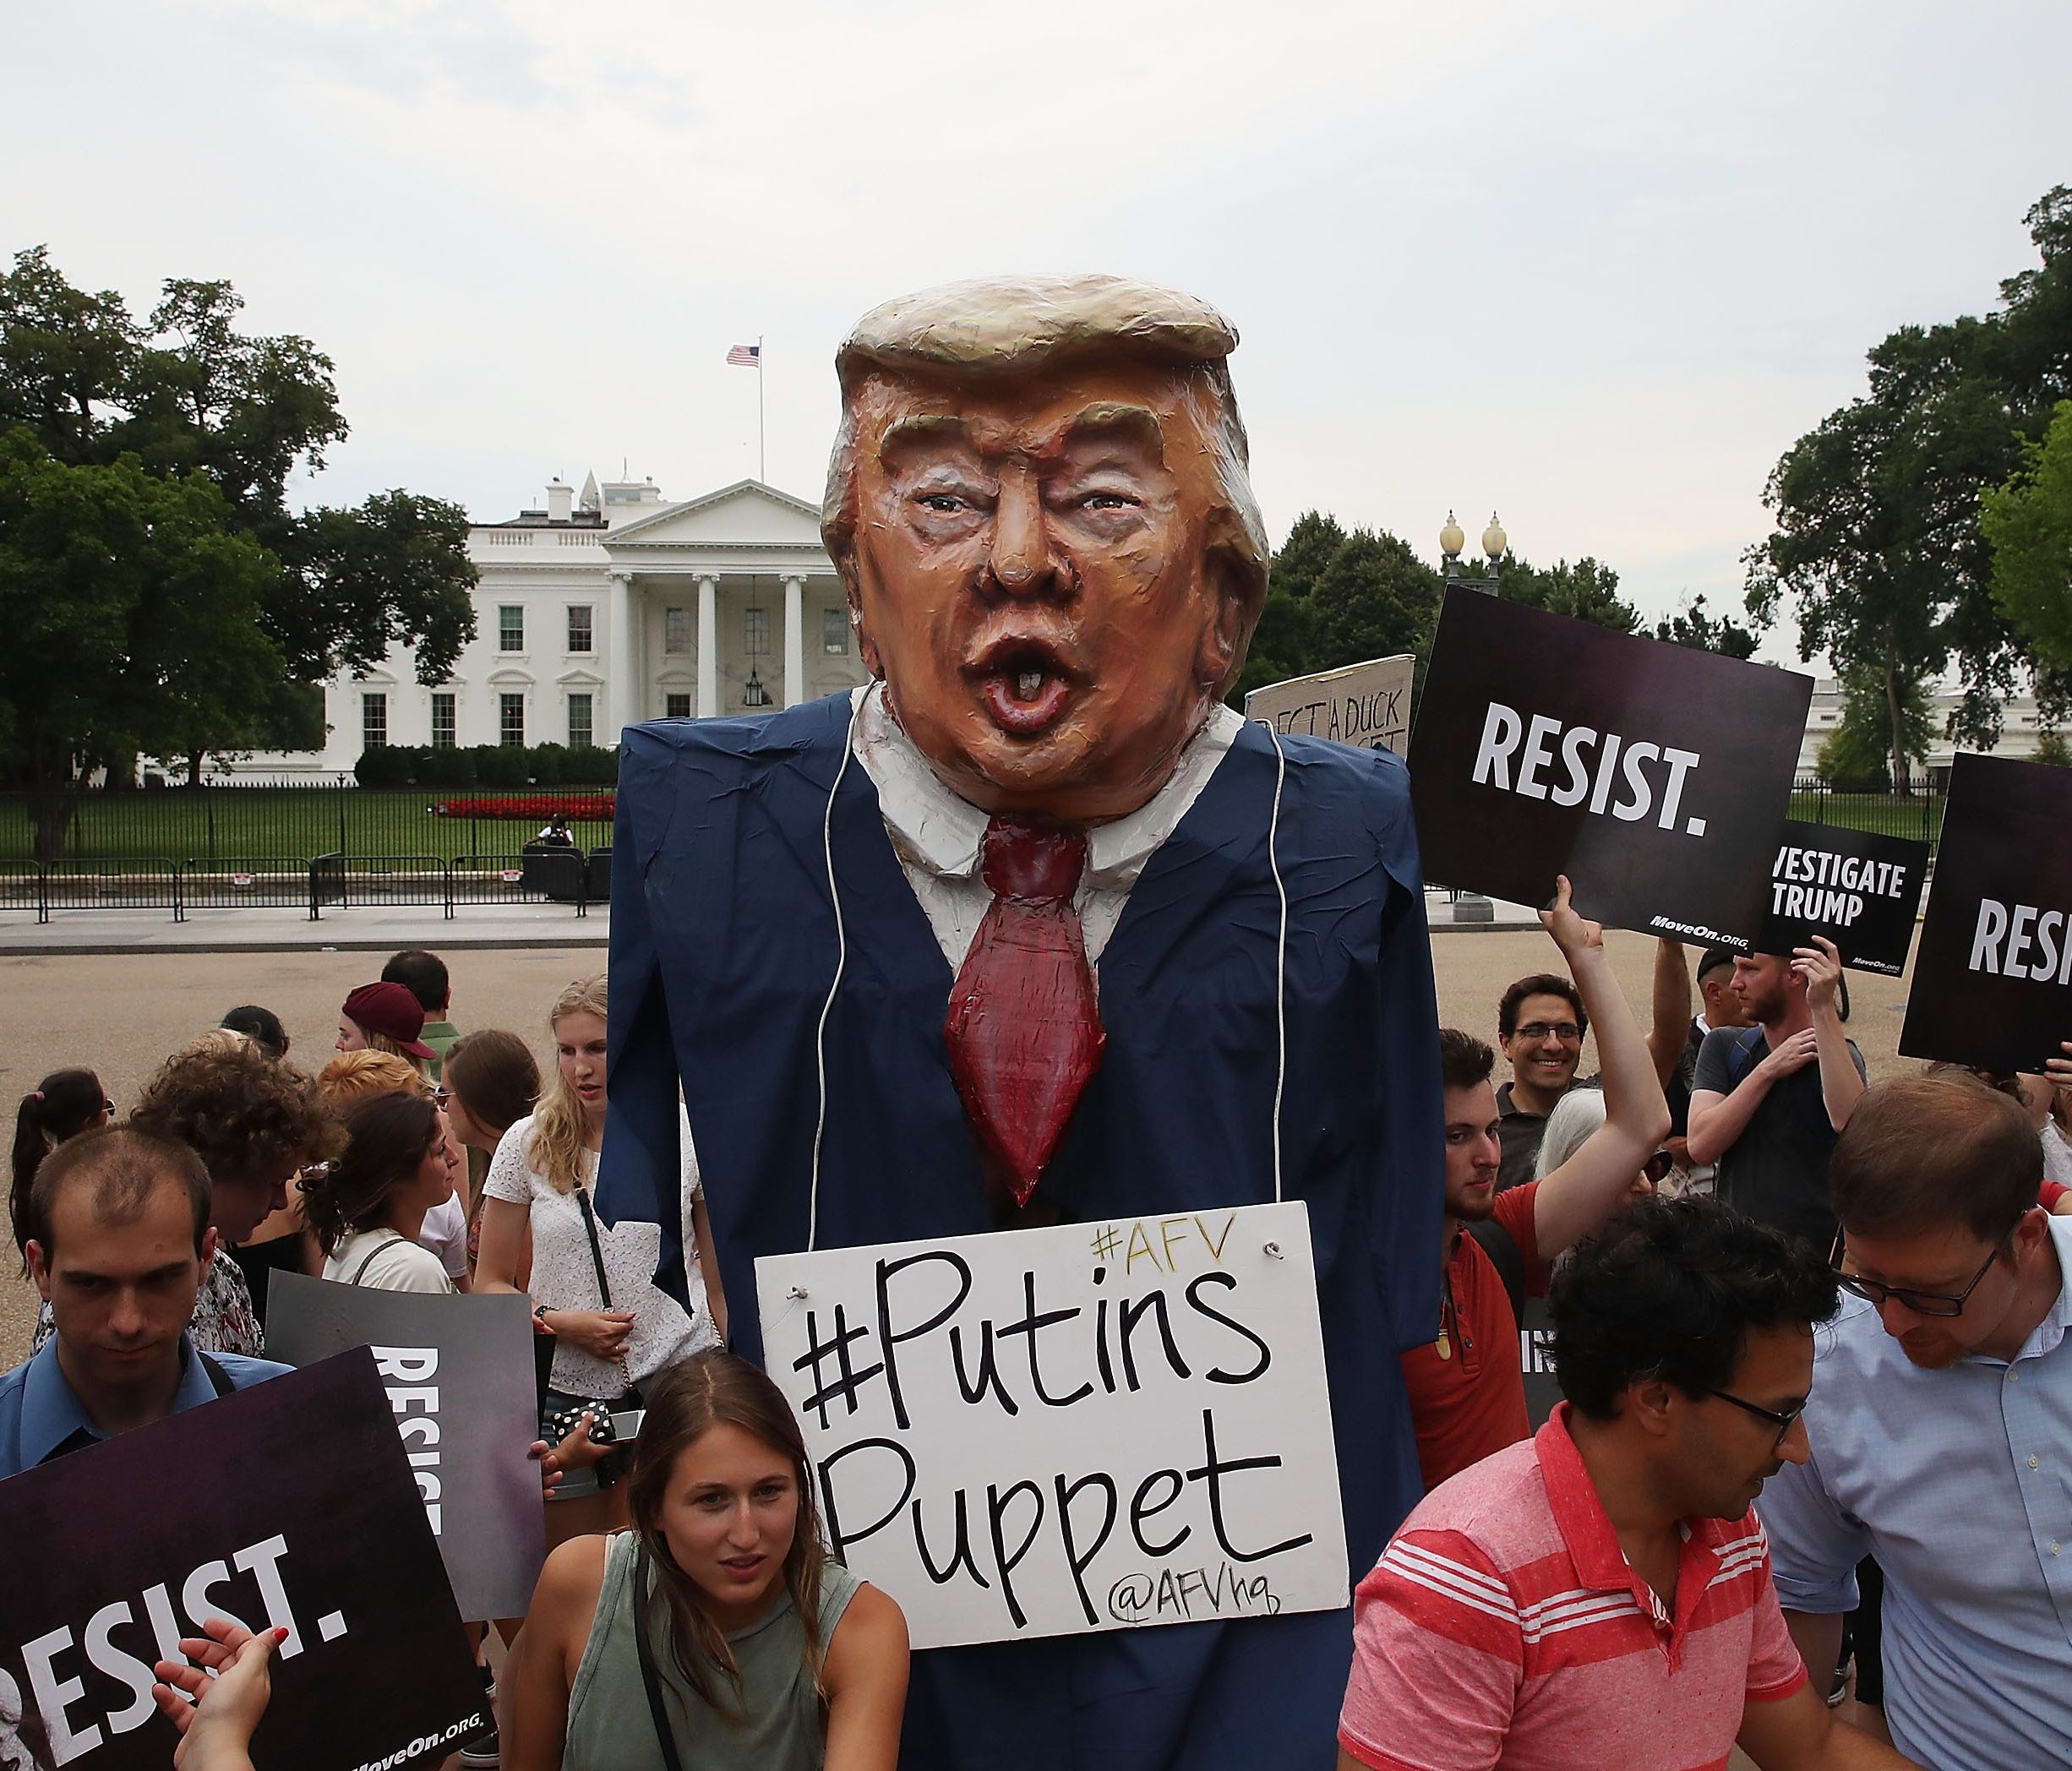 WASHINGTON, DC - JULY 11:  People protest against U.S. President Donald Trump in front of the White House on July 11, 2017 in Washington, DC. The group Moveon.org organized the protest against the president for his campaign's alleged contact with rep